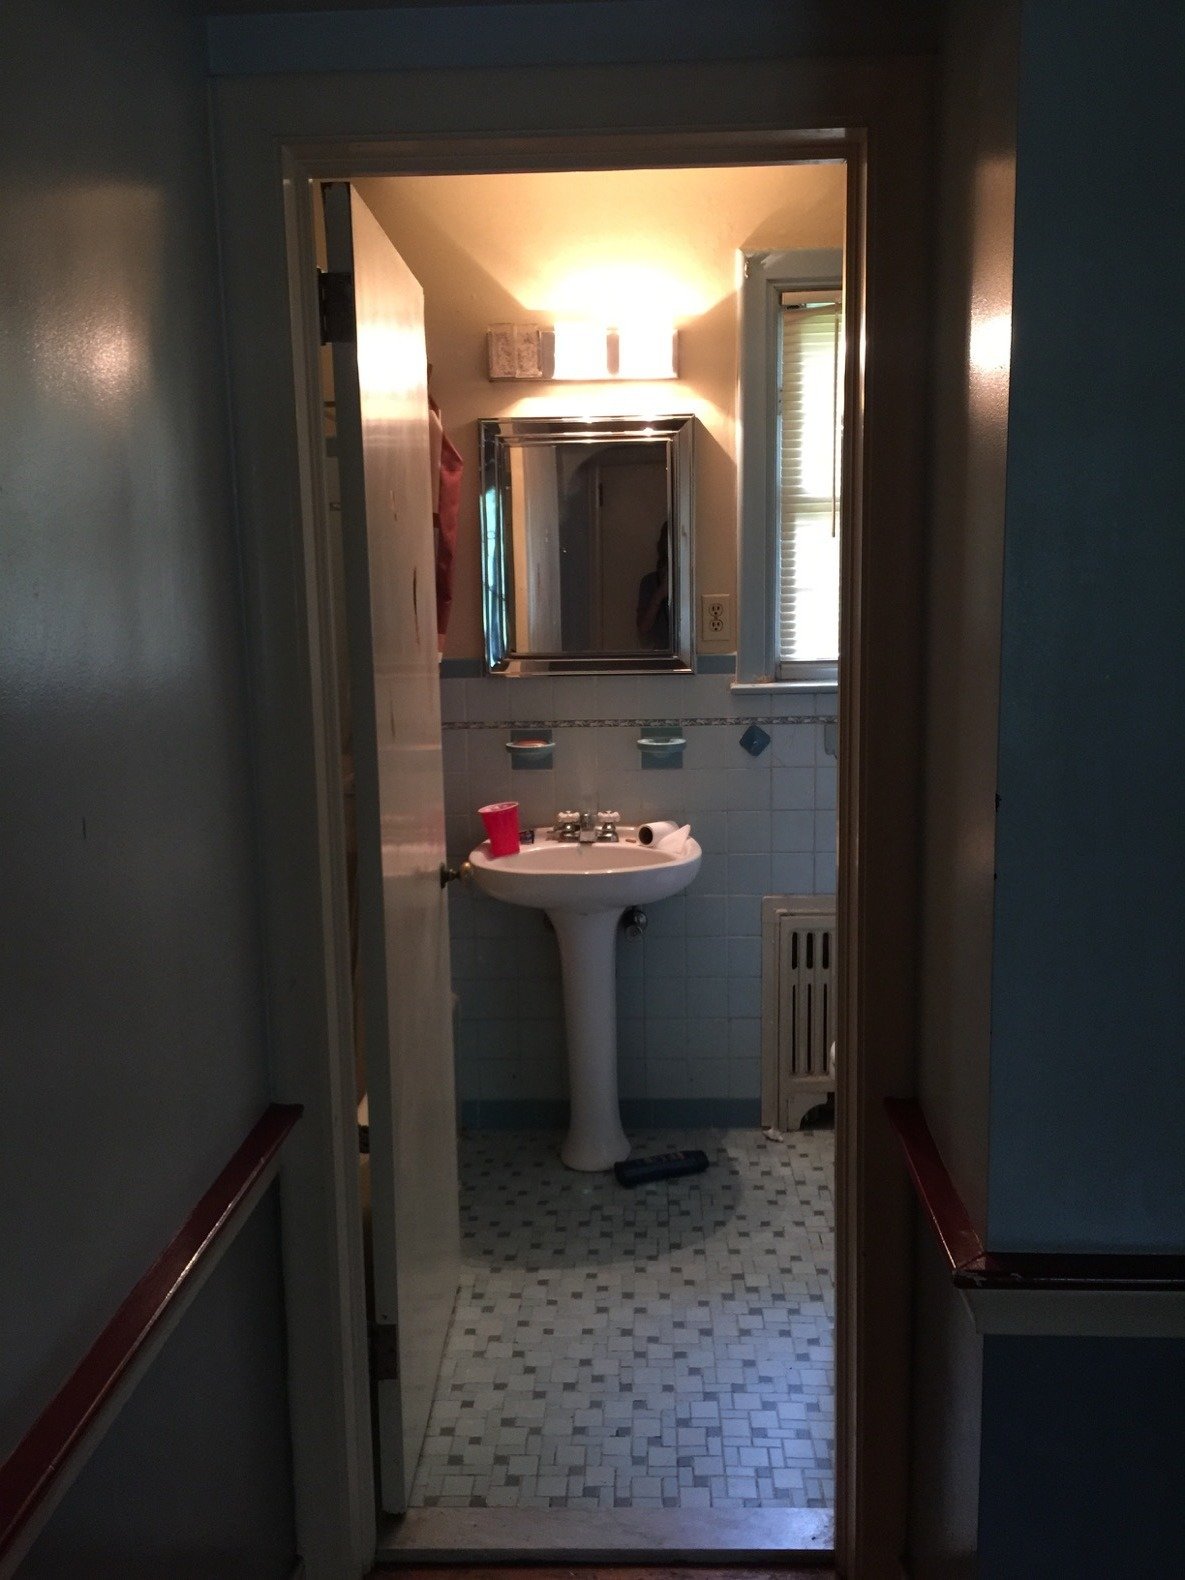 The hallway bathroom couldn't be salvaged, and the original tile was discarded. 